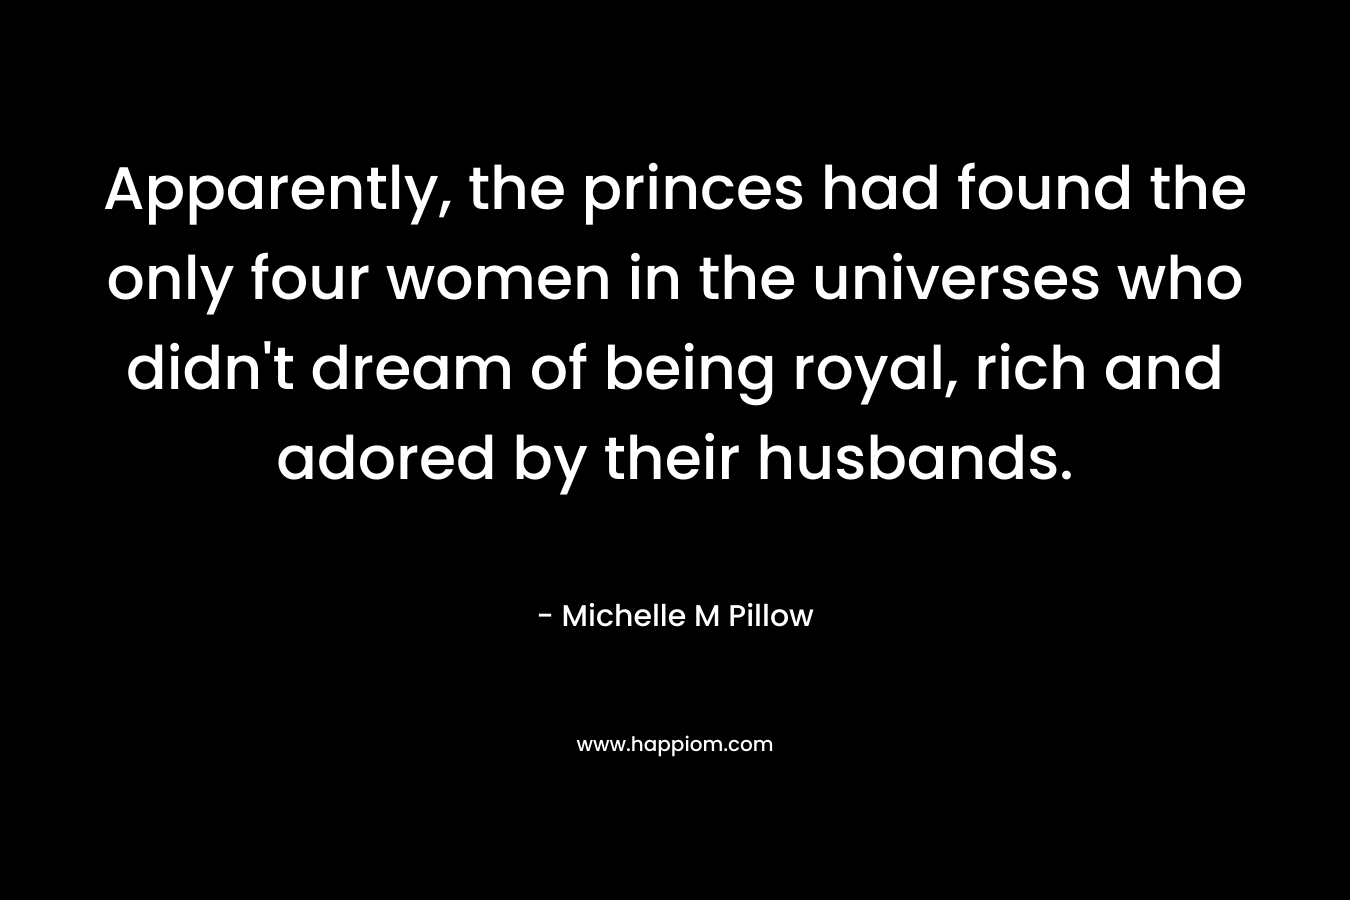 Apparently, the princes had found the only four women in the universes who didn't dream of being royal, rich and adored by their husbands.